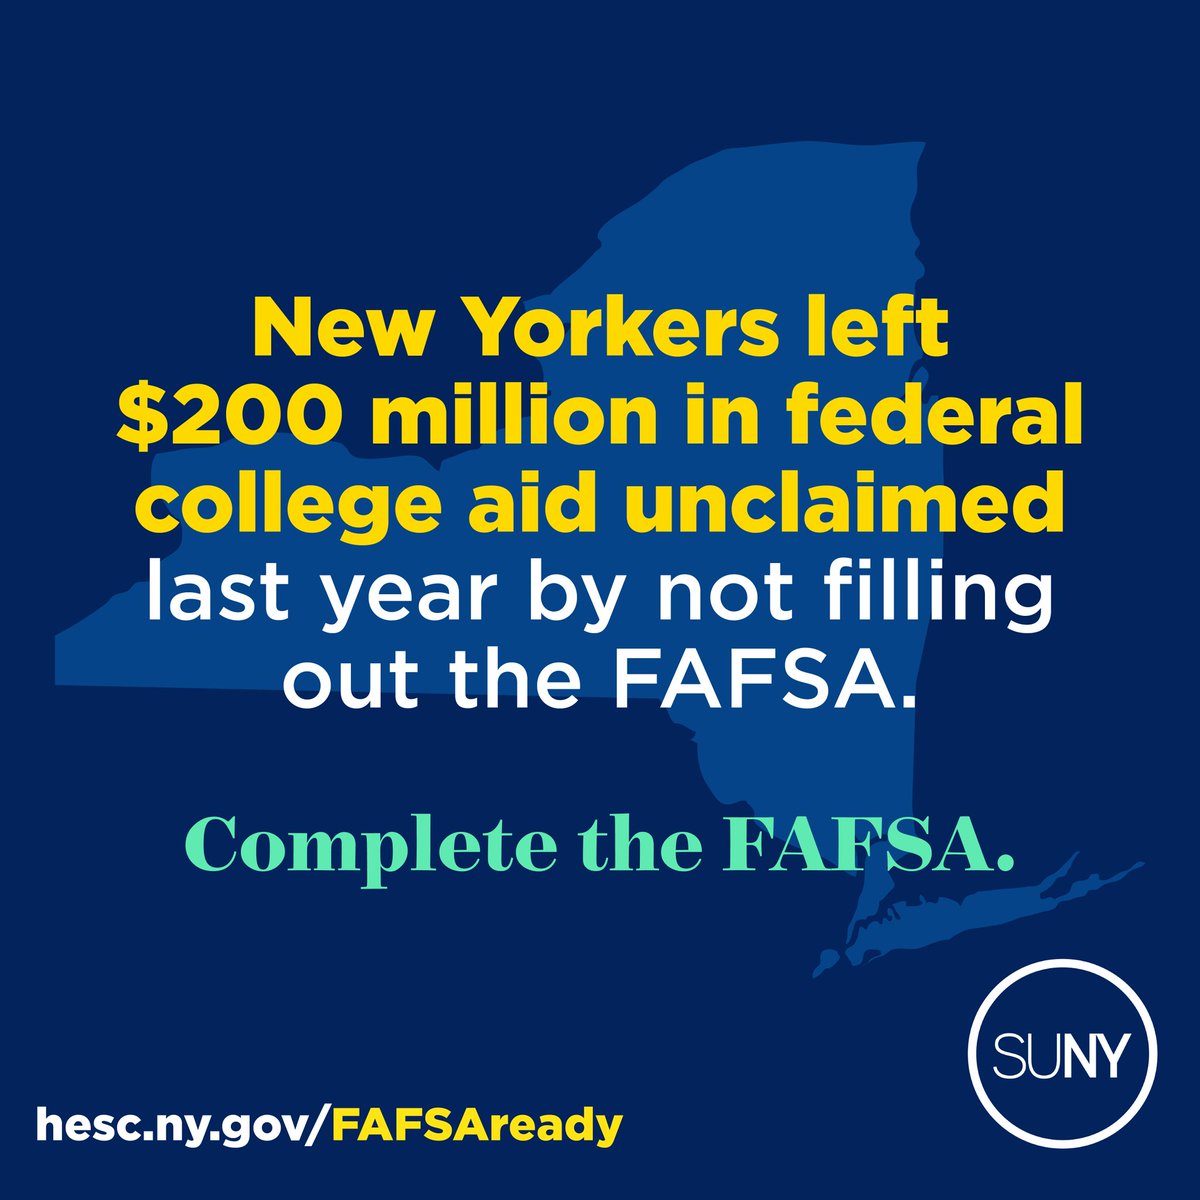 Completing the #FAFSA puts college-bound students on track for federal and state aid to help pay for college tuition, fees, books, and housing. It’s free and worth the time to complete. Find help and resources for New Yorkers at hesc.ny.gov/FAFSAready